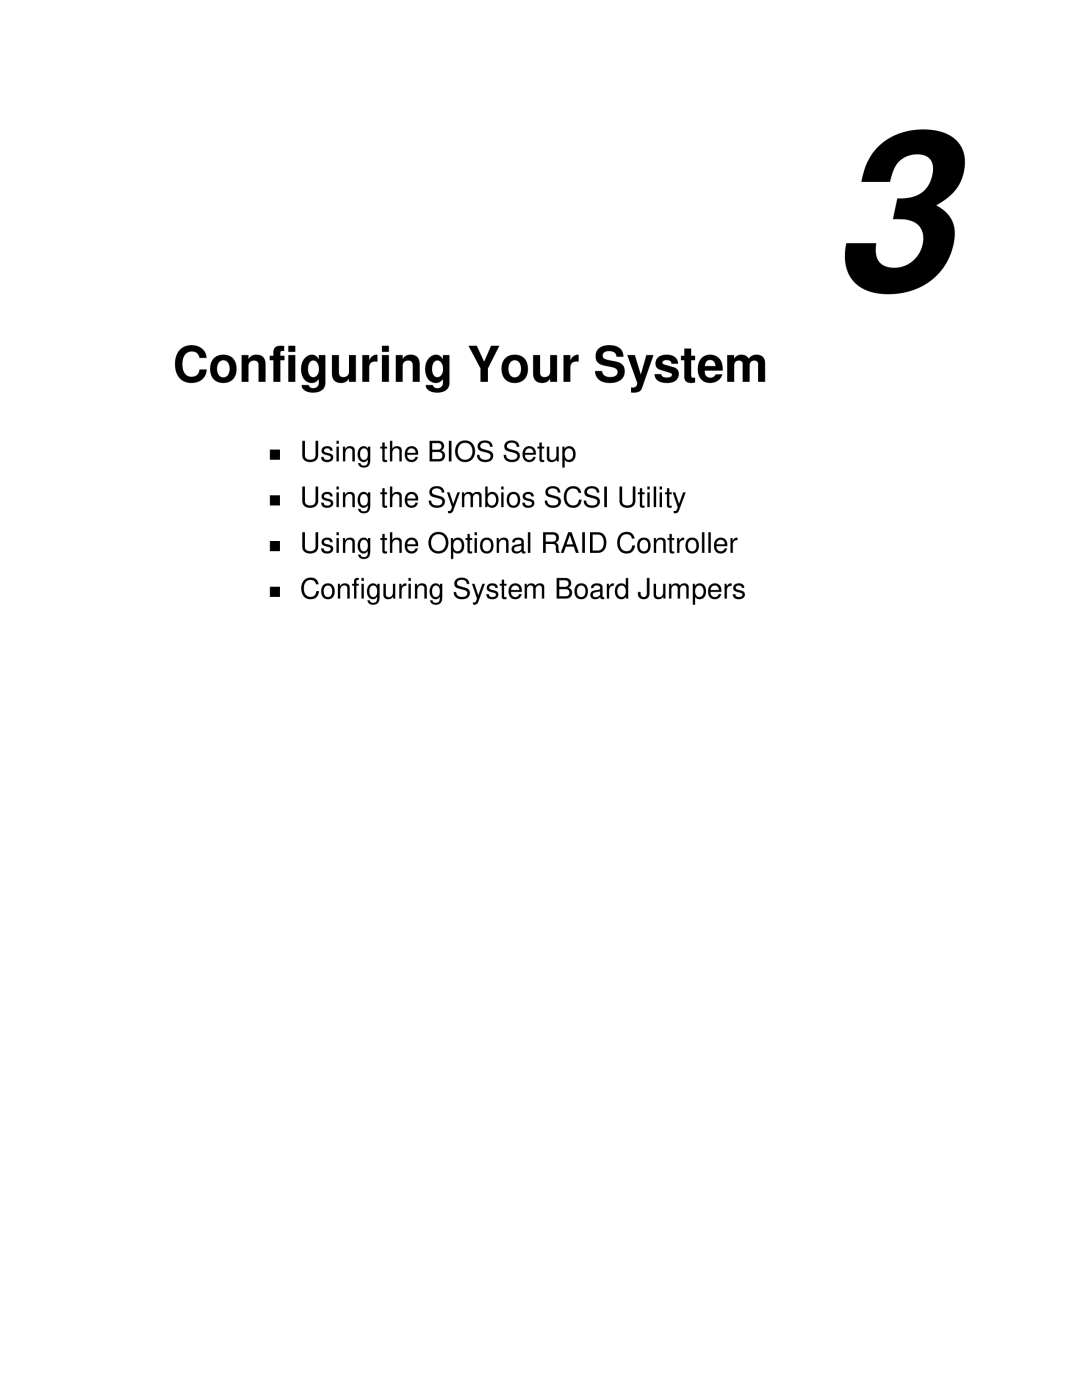 NEC MH4500 manual Configuring Your System, Using the BIOS Setup, Using the Symbios SCSI Utility 